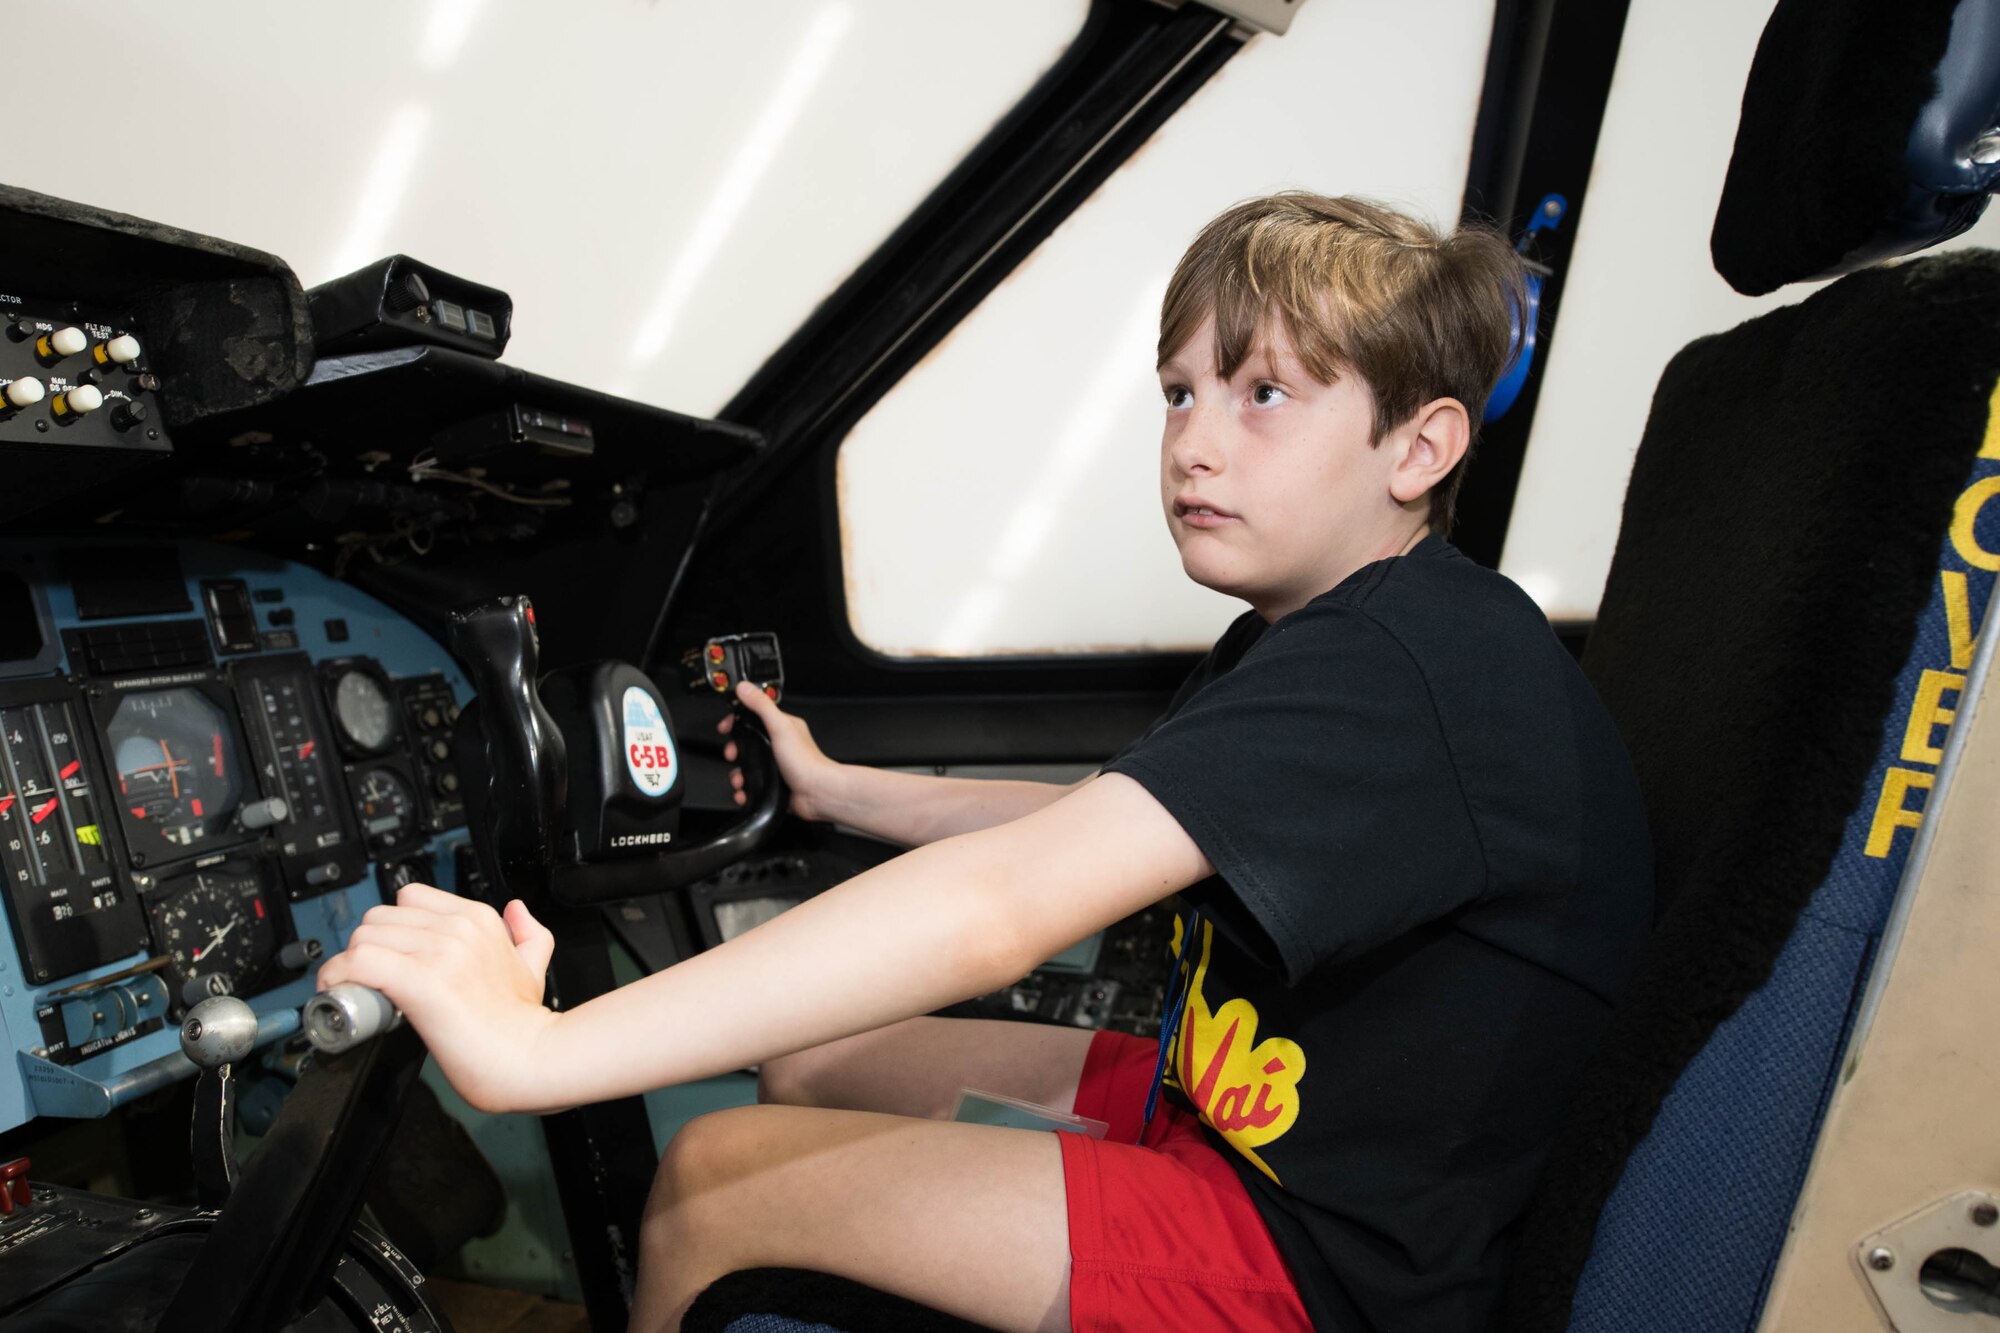 Henry Griffin practices cockpit procedures on a C-5B trainer during a 2021 Aviation Summer Camp at the Air Mobility Command Museum in Dover, Delaware, July 1, 2021. This is the first summer camp the AMC museum has hosted since the COVID-19 pandemic. (U.S. Air Force photo by Mauricio Campino)